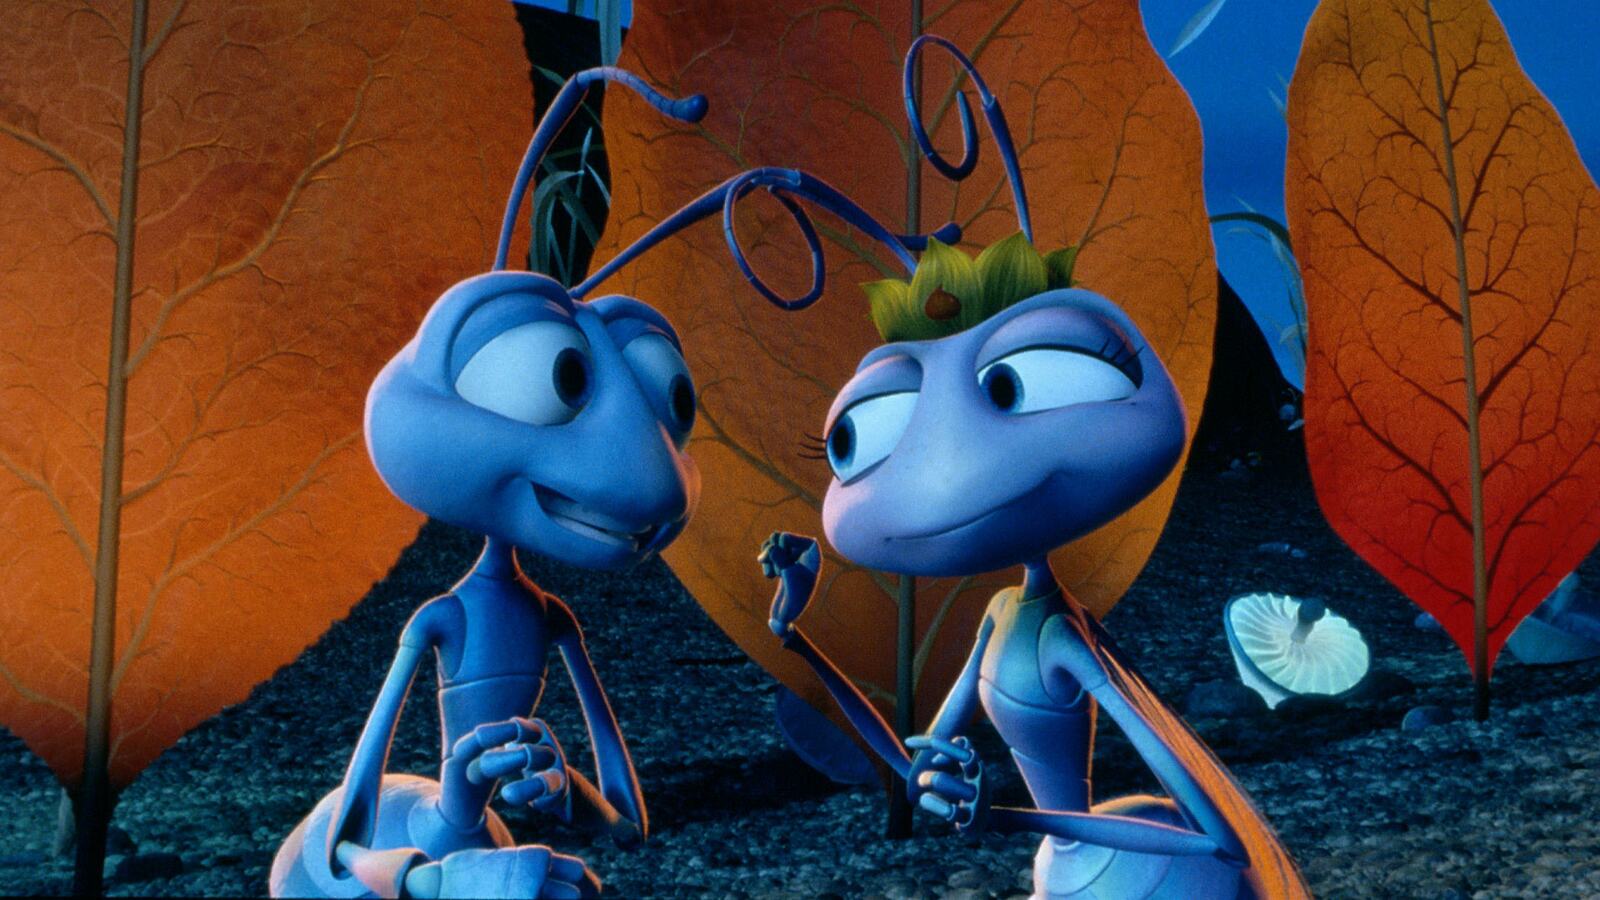 Only a True Pixar Fan Has Watched 18/21 of These Movies A Bug's Life (1998)